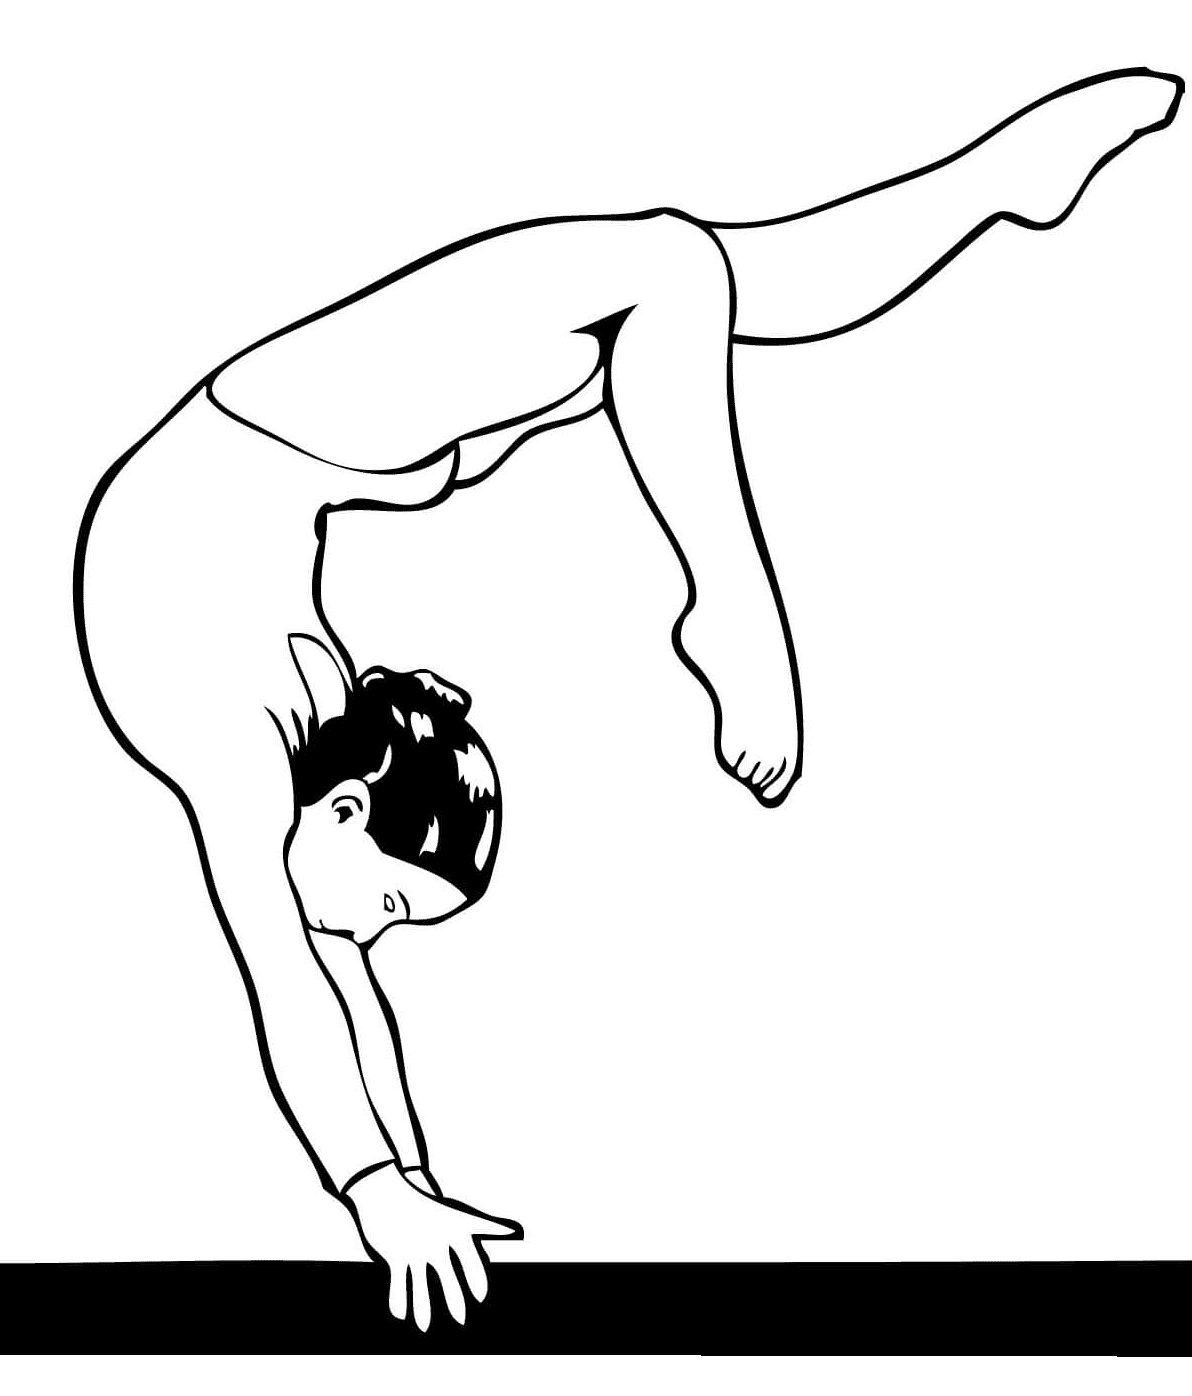 Full Turn on Balance Beam Coloring Page